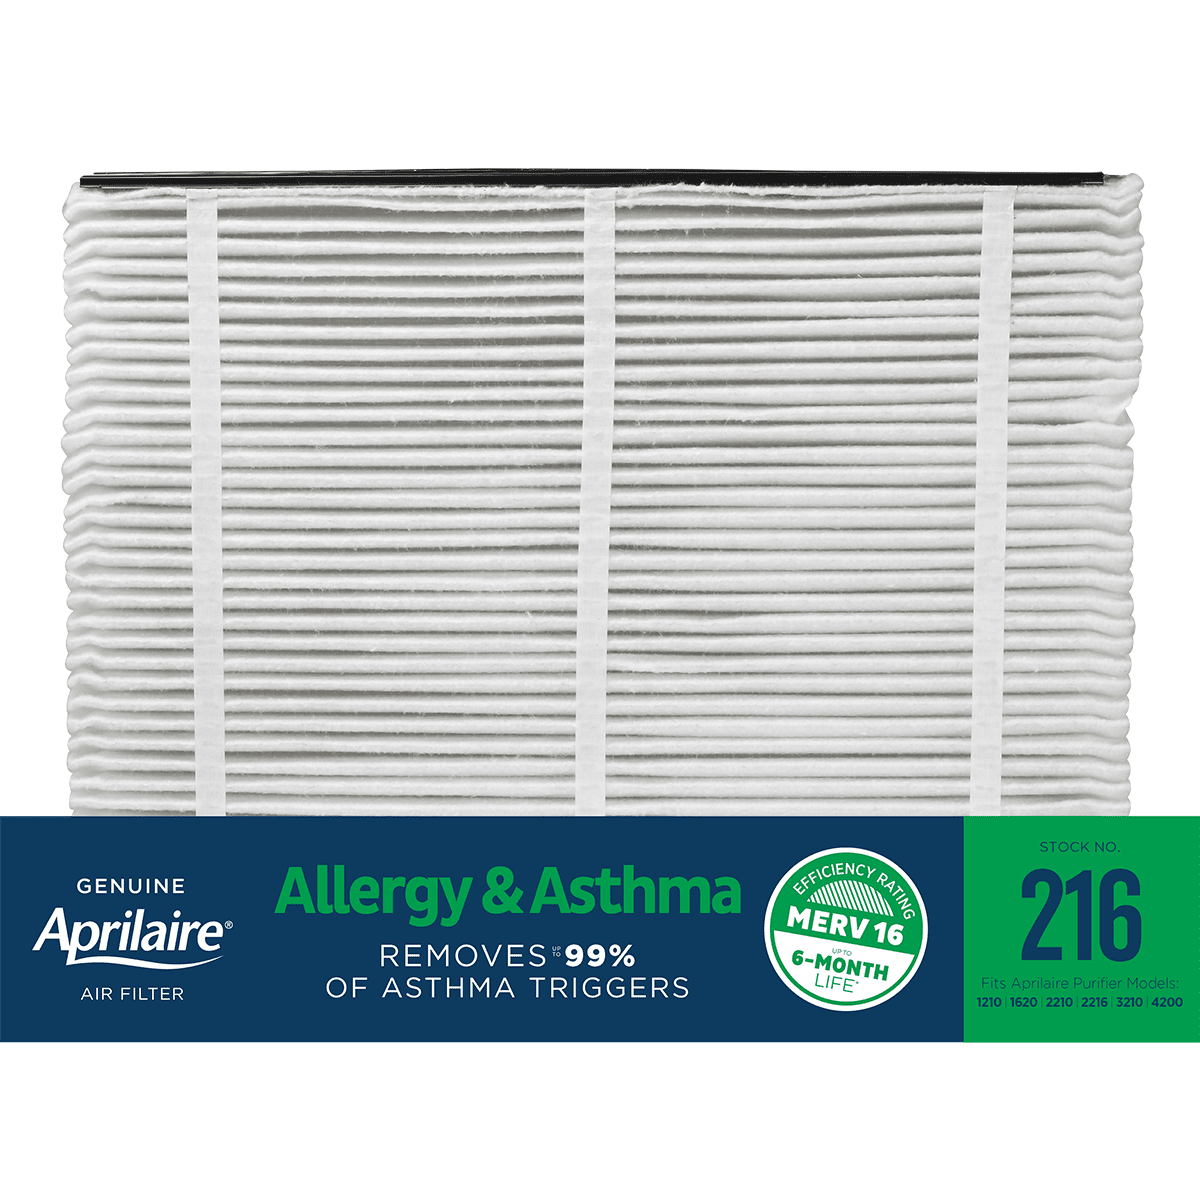 Aprilaire 216 MERV 16 Allergy & Asthma Replacement Filter (20x25)